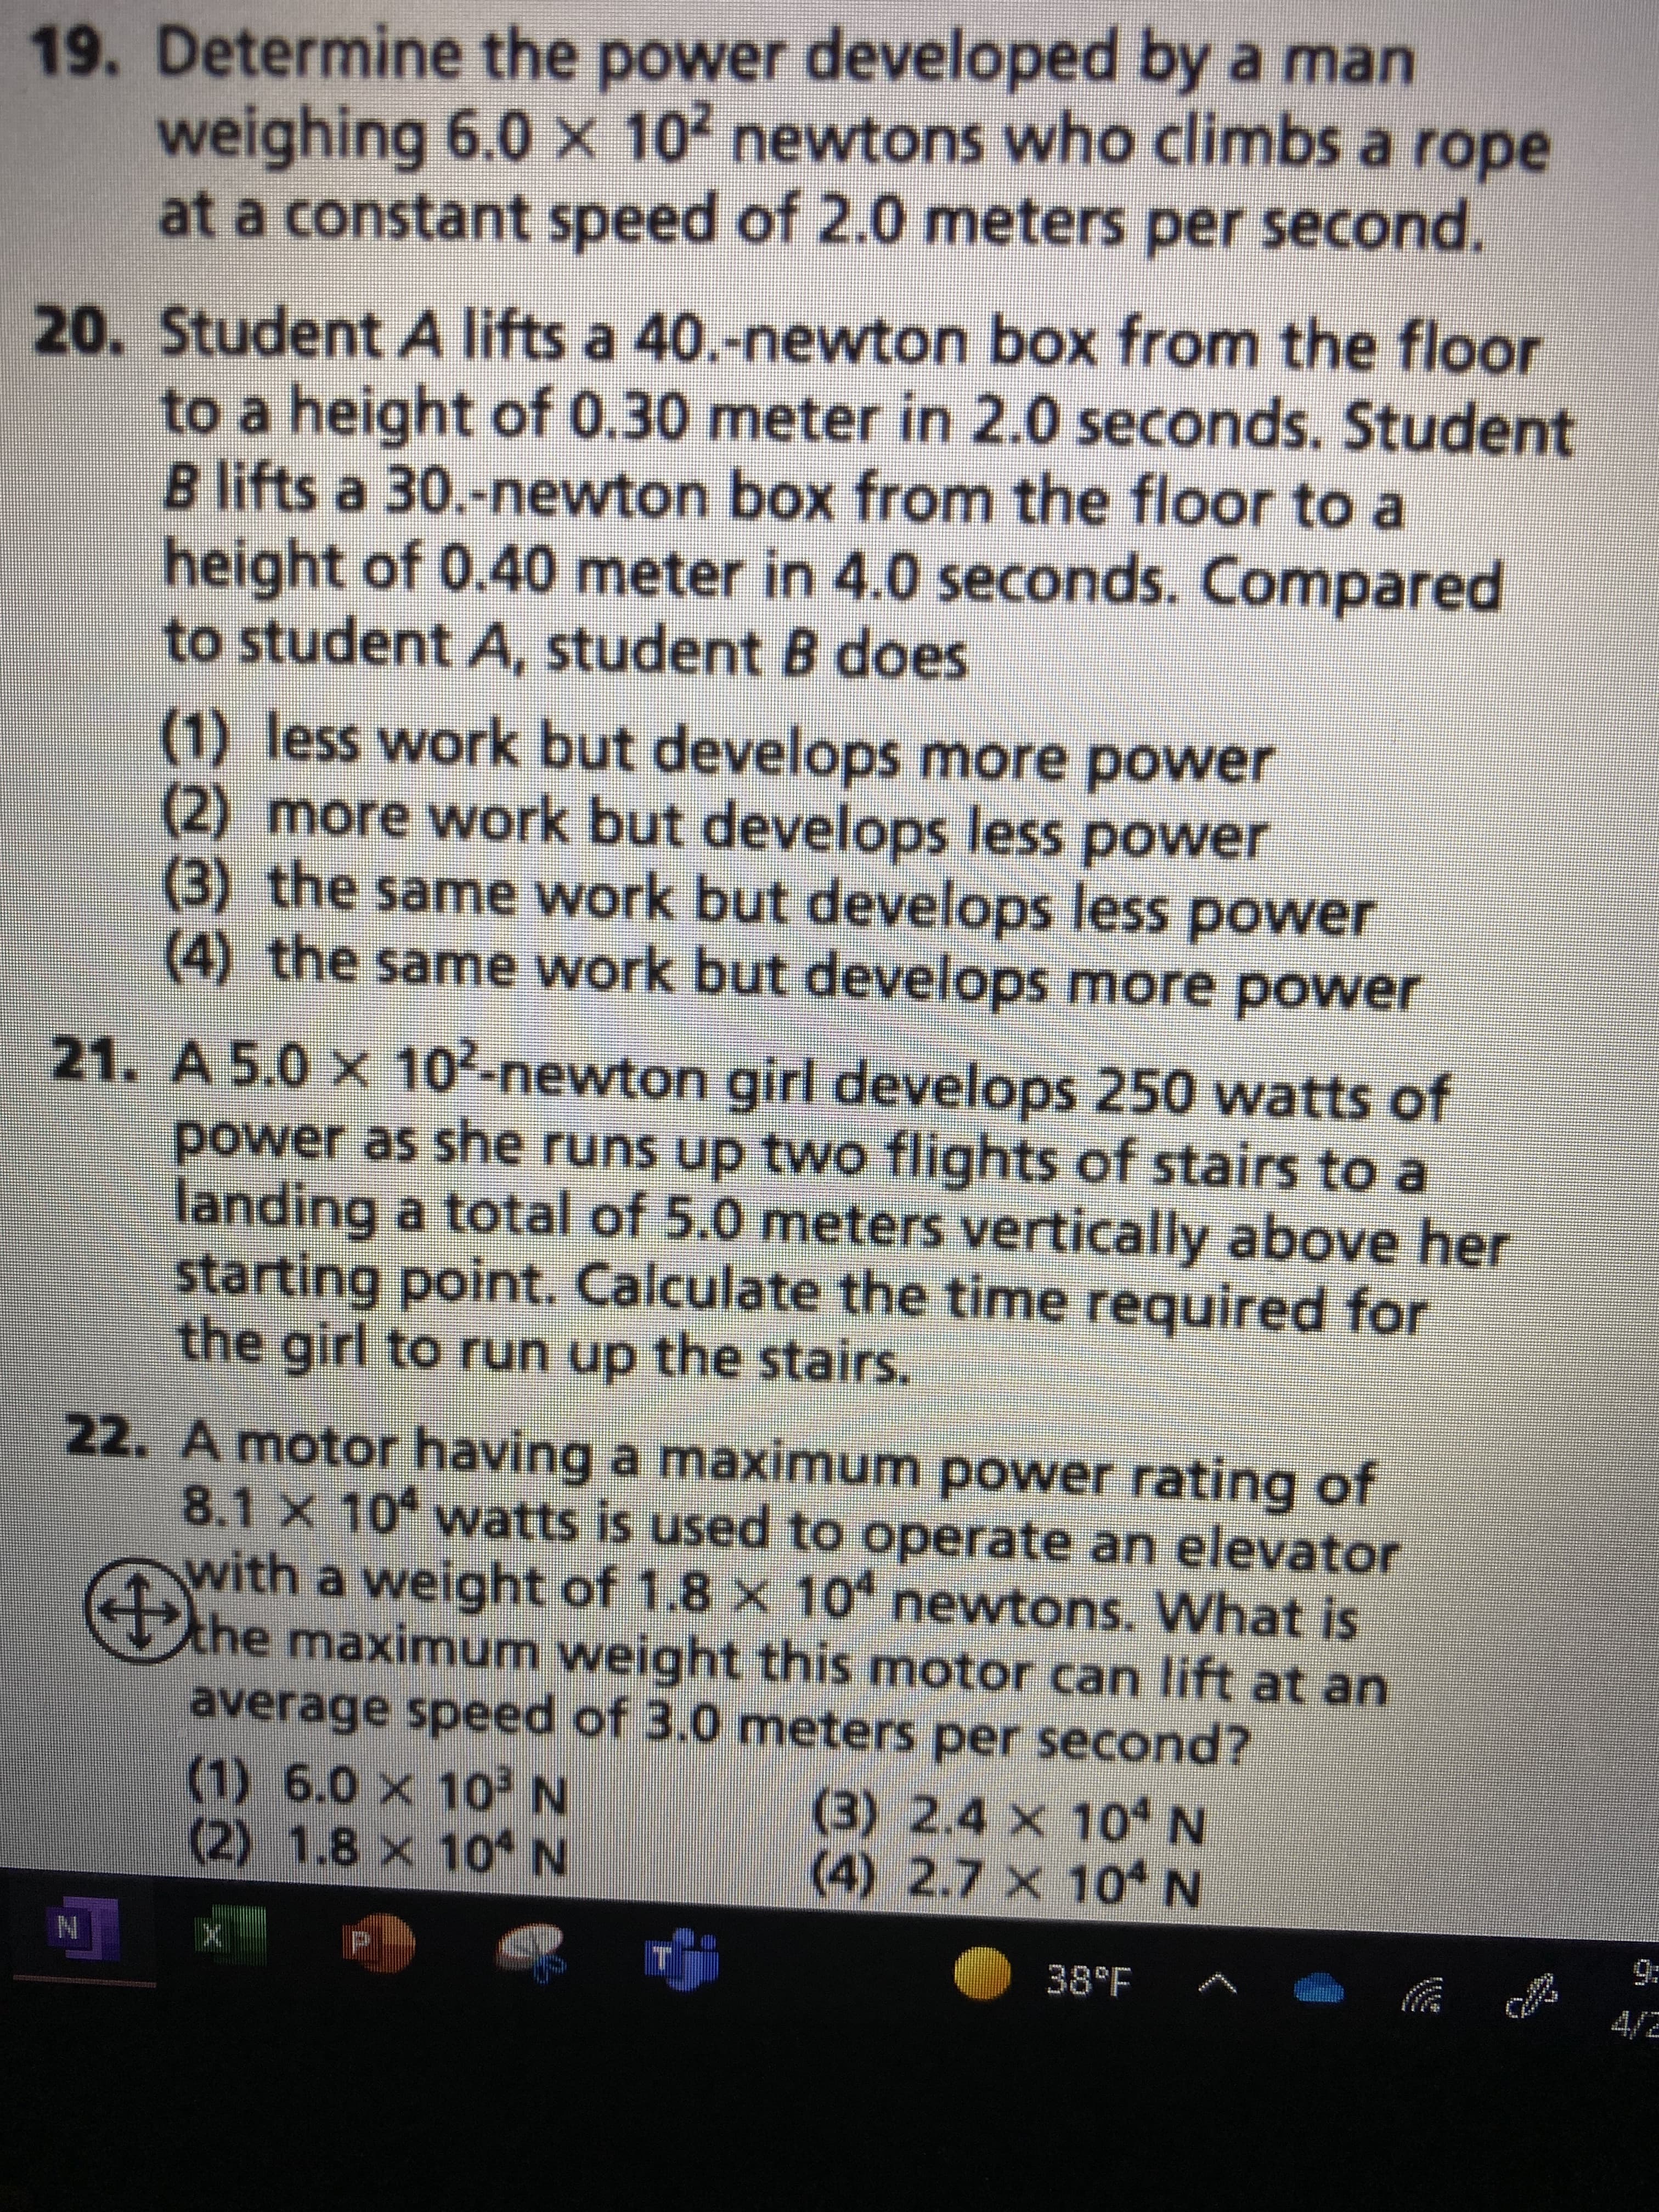 19. Determine the power developed by a man
weighing 6.0 × 10² newtons who climbs a rope
at a constant speed of 2.0 meters per second.
20. Student A lifts a 40.-newton box from the floor
to a height of 0.30 meter in 2.0 seconds. Student
B lifts a 30.-newton box from the floor to a
height of 0.40 meter in 4.0 seconds. Compared
to student A, student B does
(1) less work but develops more power
(2) more work but develops less power
(3) the same work but develops less power
(4) the same work but develops more power
21. A 5.0 × 10²-newton girl develops 250 watts of
power as she runs up two flights of stairs to a
landing a total of 5.0 meters vertically above her
starting point. Calculate the time required for
the girl to run up the stairs.
22. A motor having a maximum power rating of
8.1 x 10 watts is used to operate an elevator
with a weight of 1.8 x 104 newtons. What is
the maximum weight this motor can lift at an
average speed of 3.0 meters per second?
(1) 6.0 x 10²³ N
(3) 2.4 × 10 N
(2) 1.8 x 104 N
(4) 2.7 x 10* N
38°F
N
ch
9: